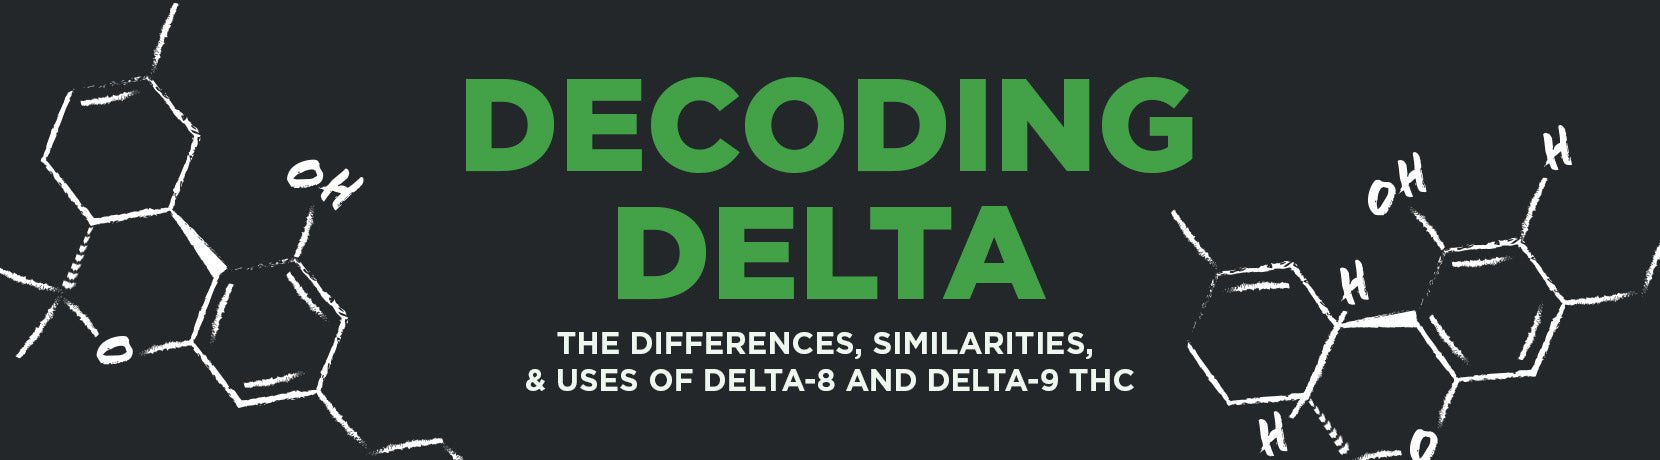 Decoding Delta: The Differences, Similarities, and Uses of Delta-8 THC and Delta-9 THC - Shop CBD Kratom